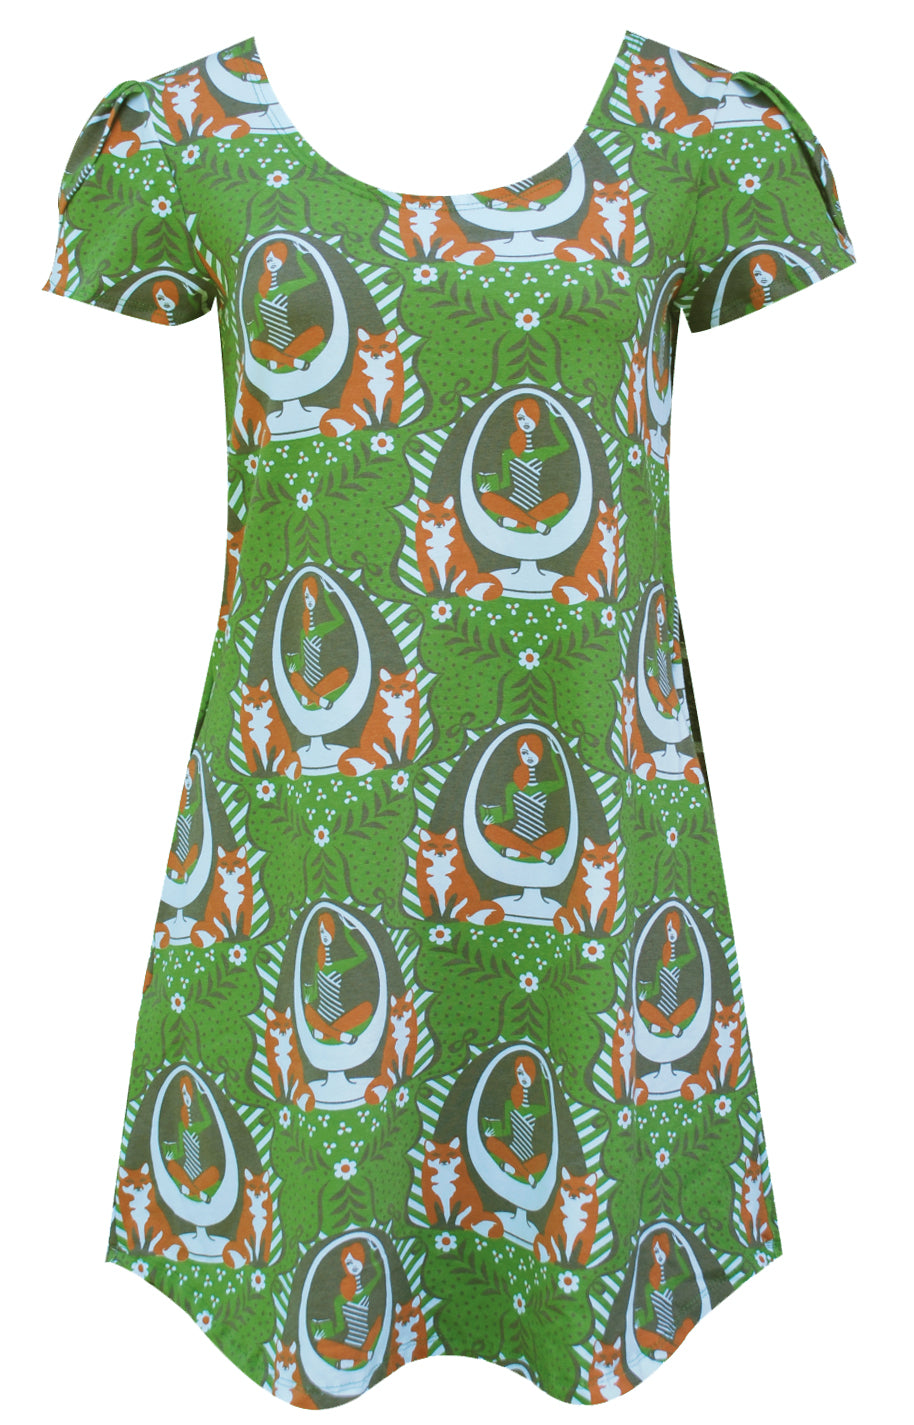 Olive green tulip-sleeve tunic with brown, orange and white print of girl reading in egg chair and foxes